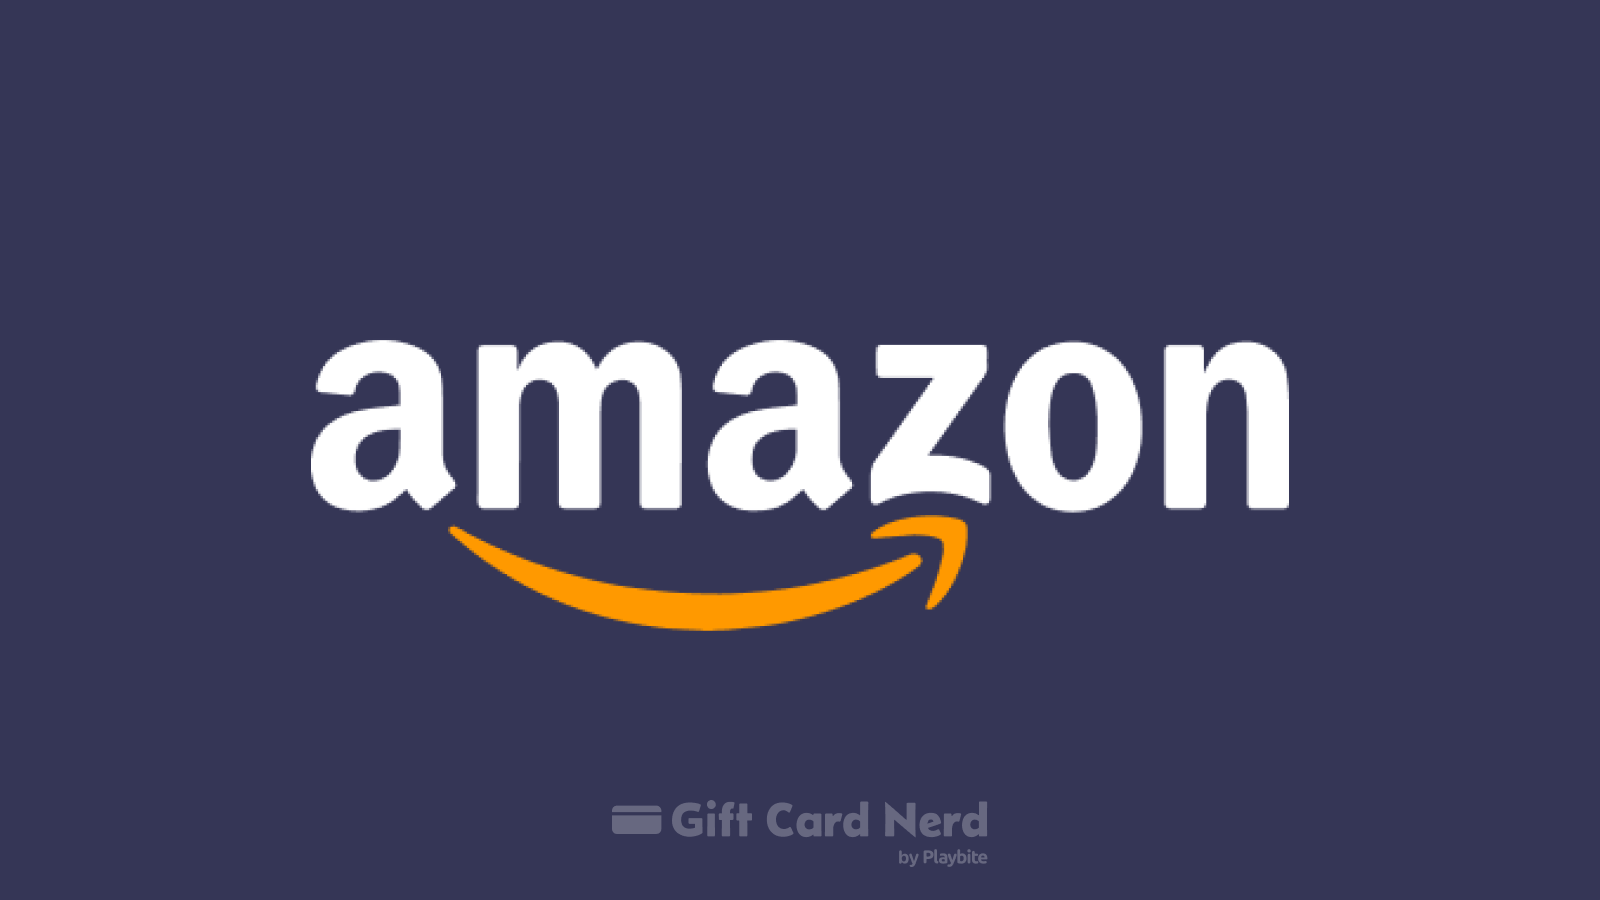 Can You Use an Amazon Gift Card on Postmates?